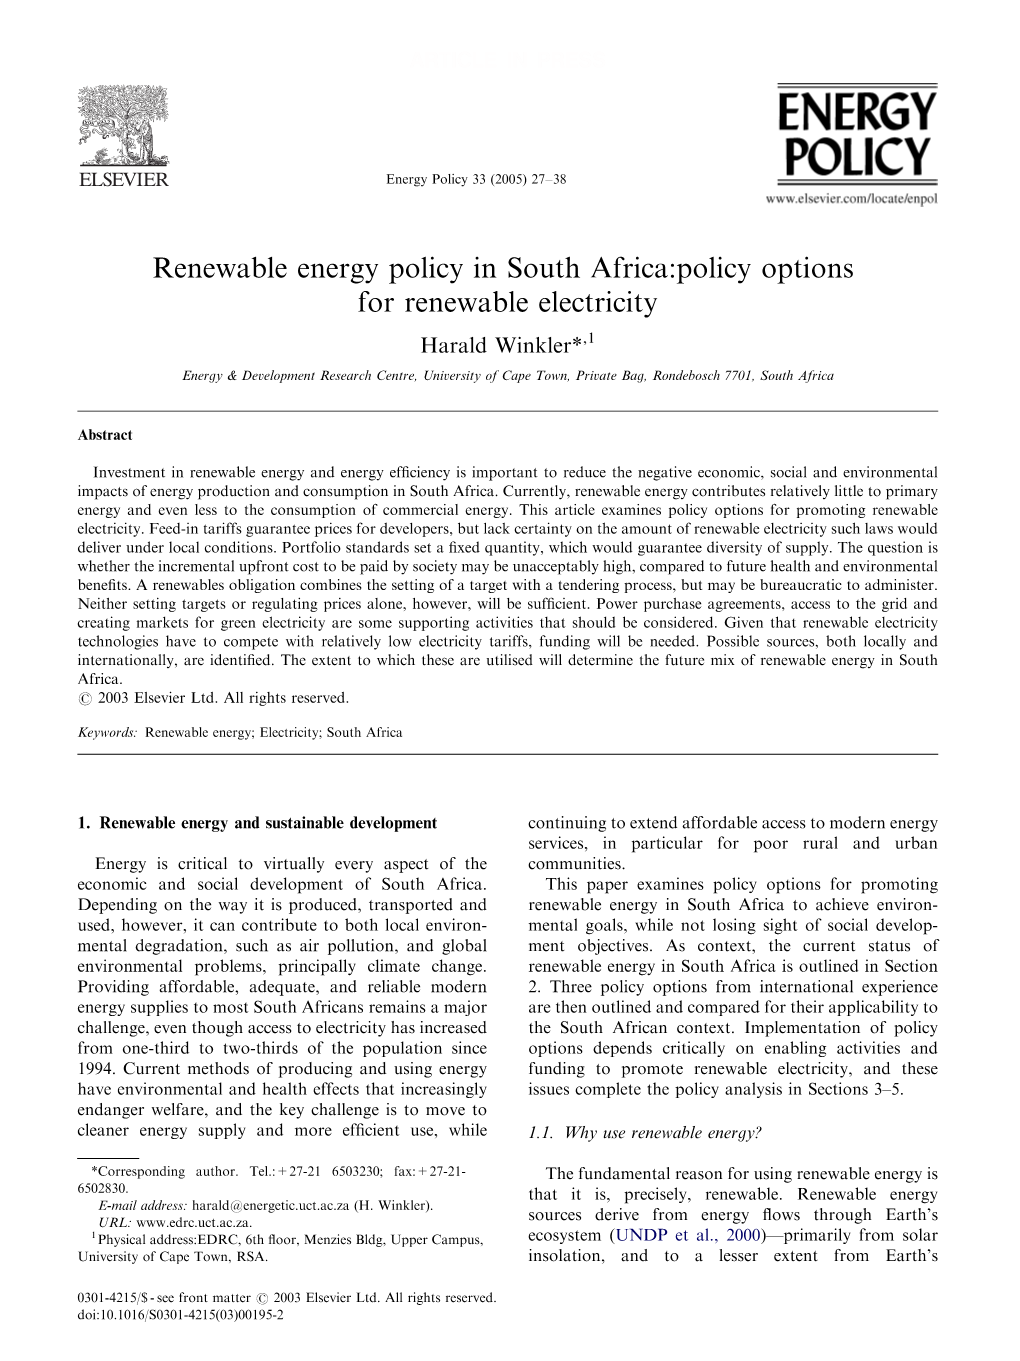 Renewable Energy Policy in South Africa